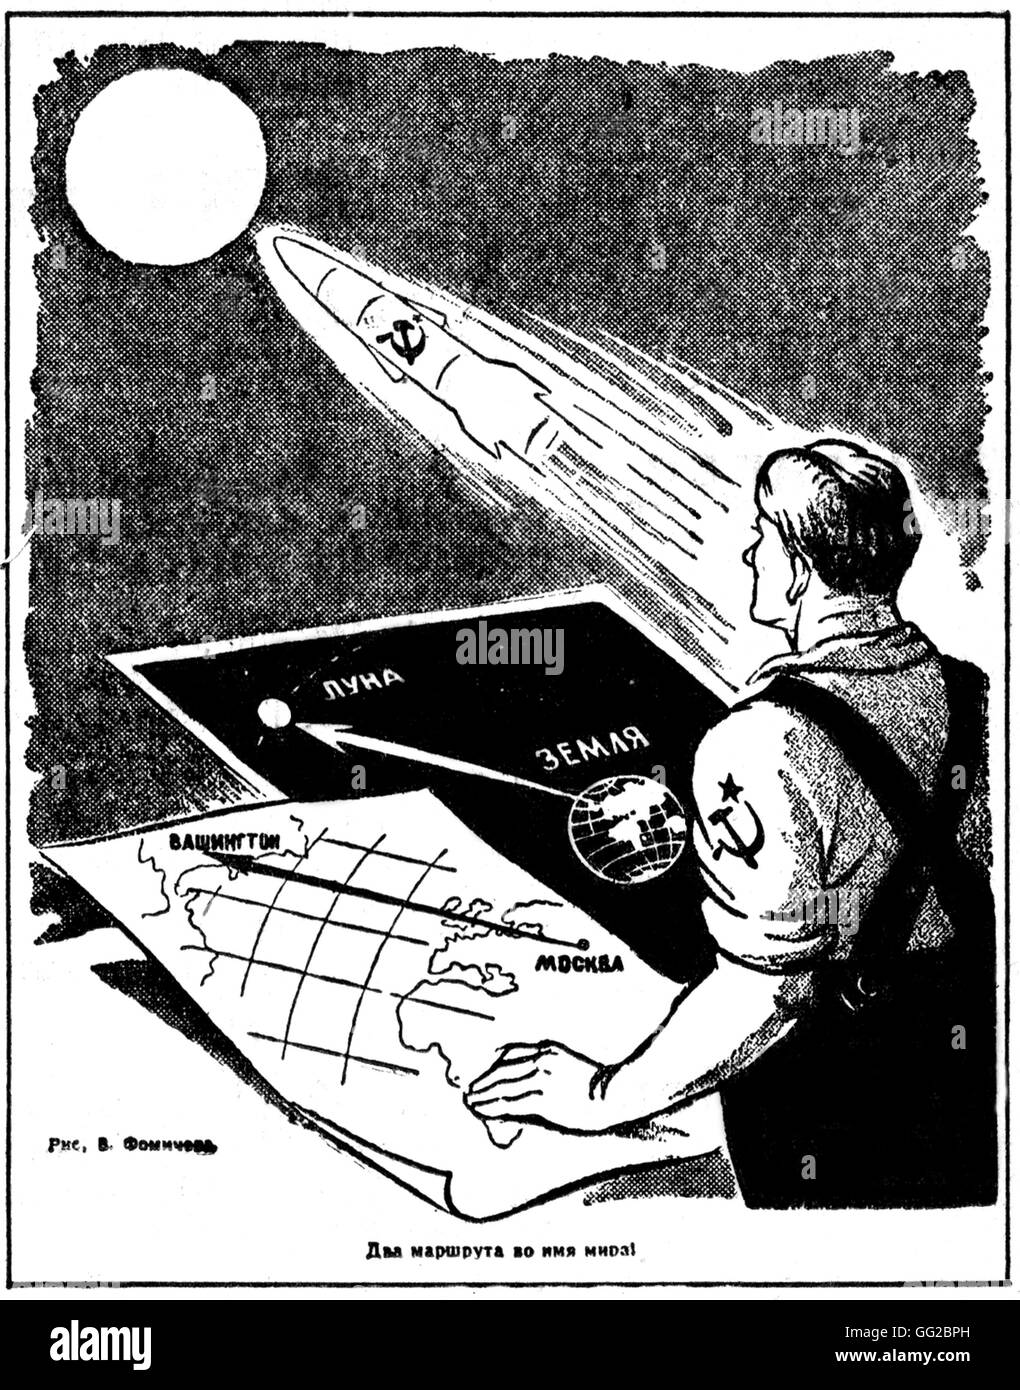 Drawing in 'Trud' : 'Earth-Moon' (Today, at 2 min 24 s. past midnight, Moscow time, the space rocket reached the moon) September 14, 1959 U.S.S.R. Stock Photo